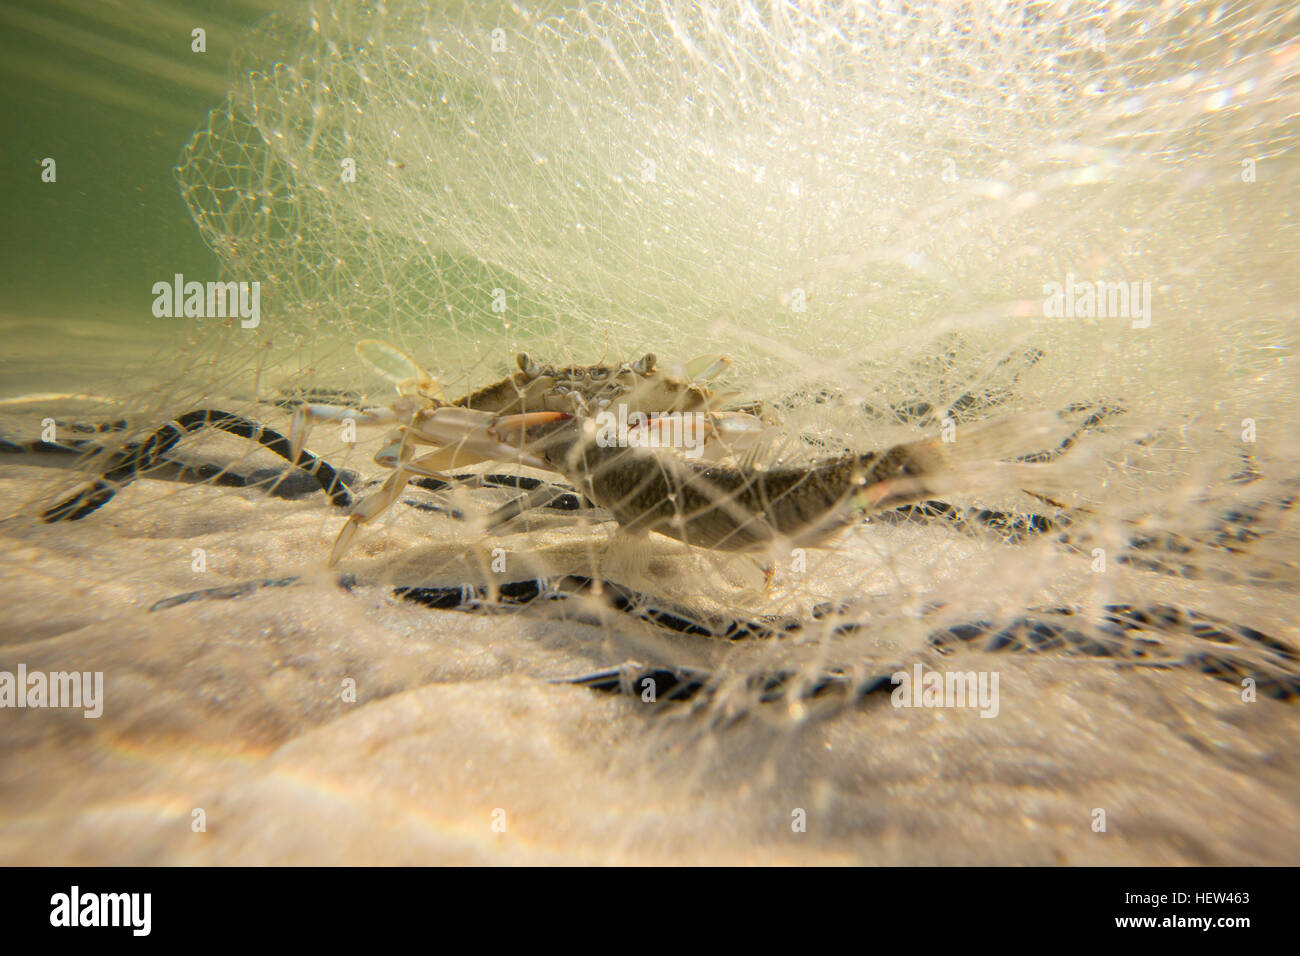 Crab caught in net with bait fish, Fort Walton Beach, Florida, USA Stock Photo